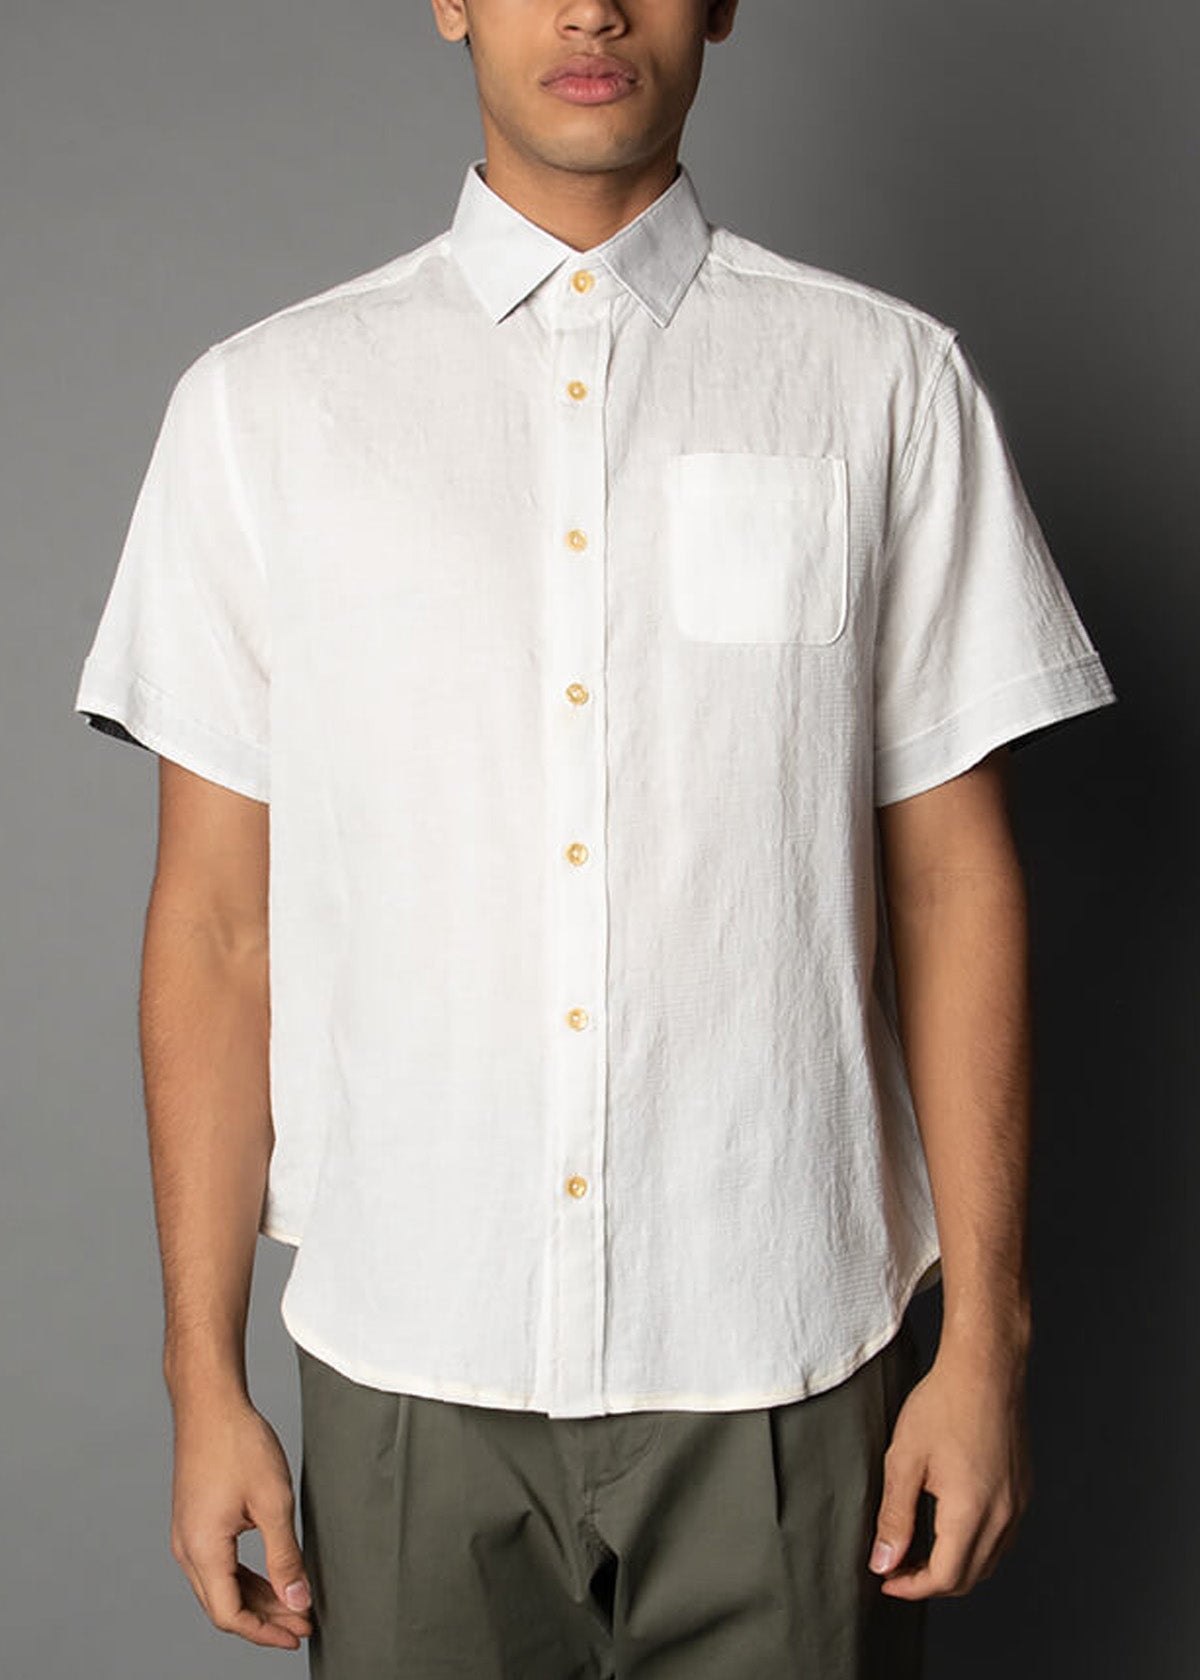 white relaxed fit jacquard fabric men's shirt